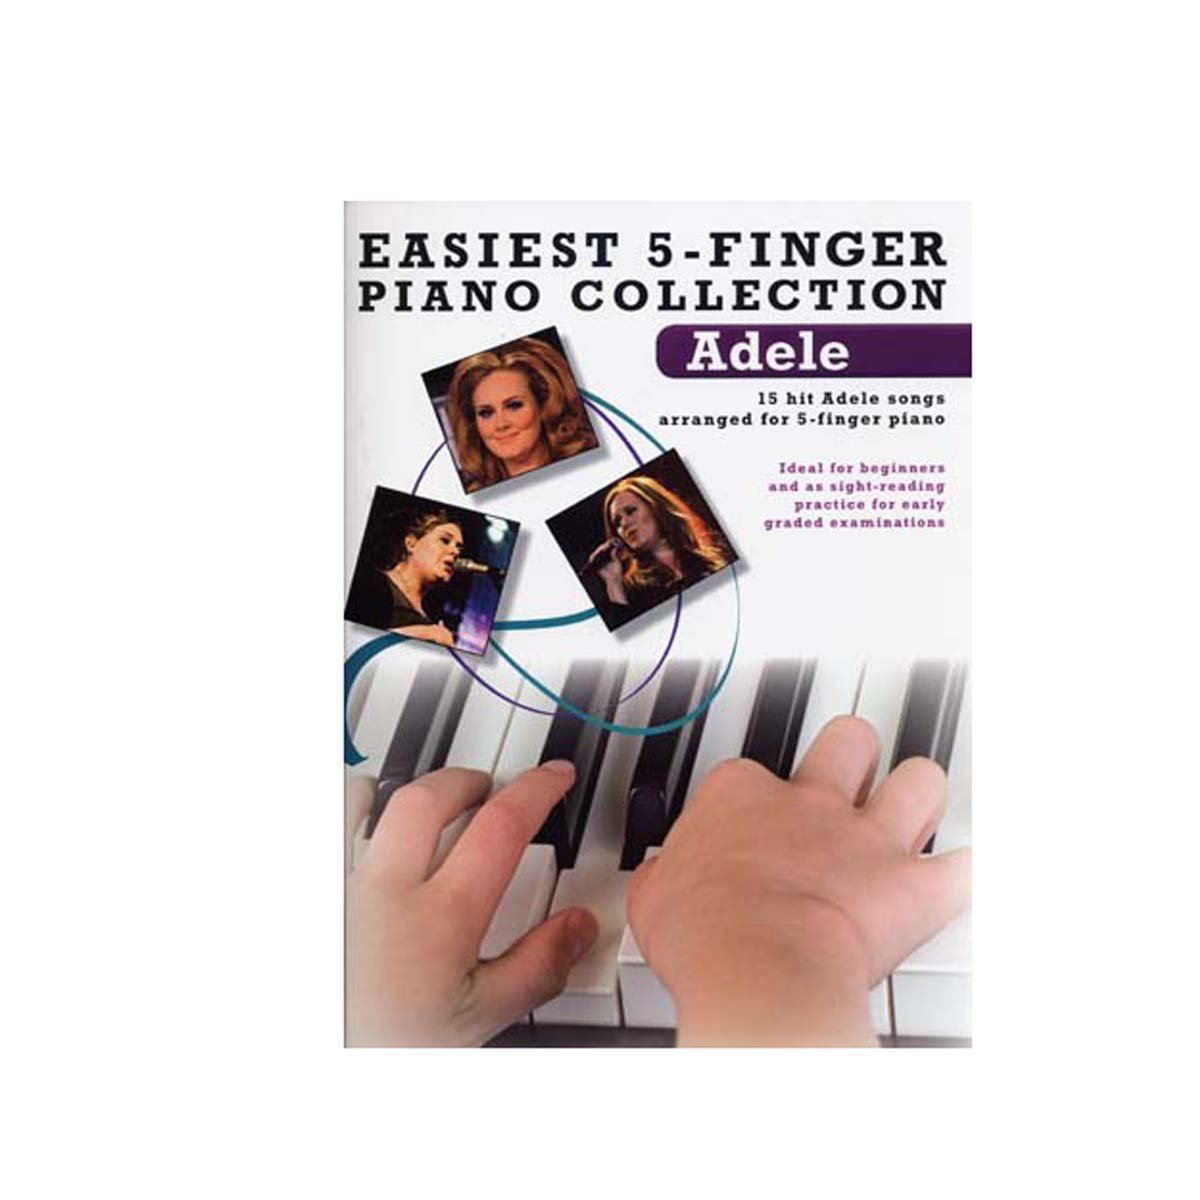 Easiest 5-finger piano collection Adele